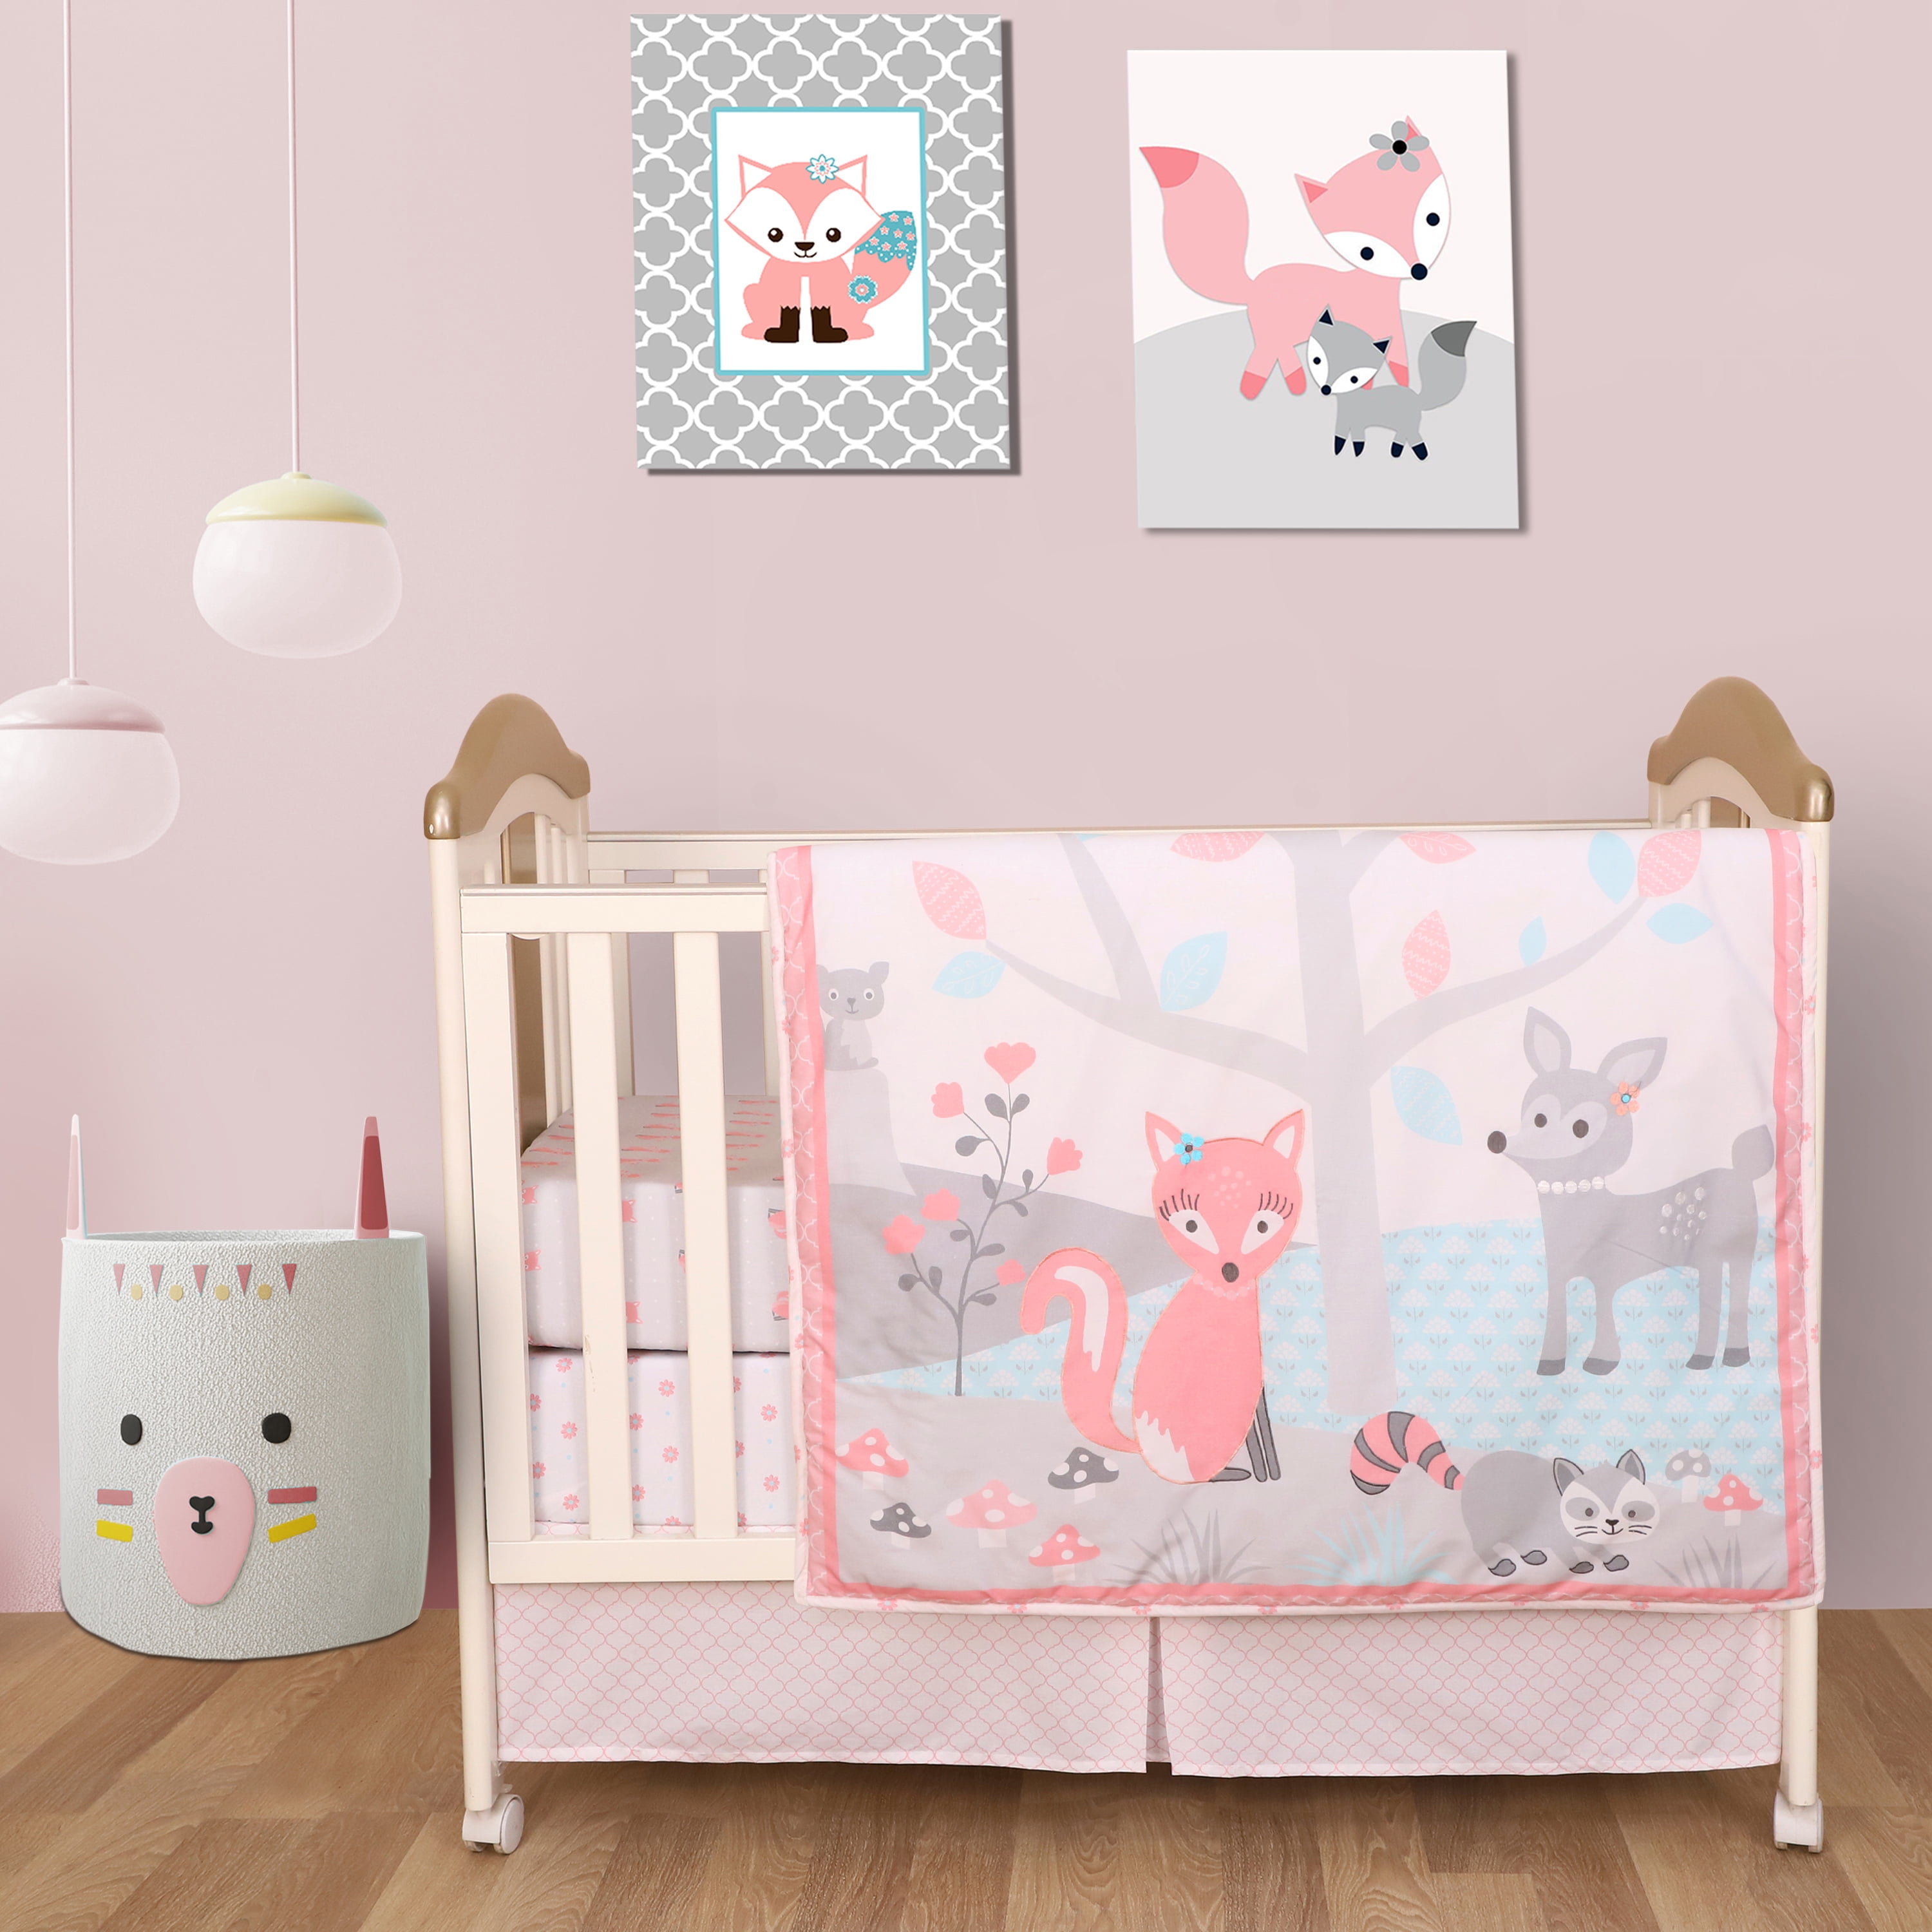 BABY BEDDING FLAT PILLOW COT BED MADE OF COTTON & SOFT PLUSH CUDDLE 